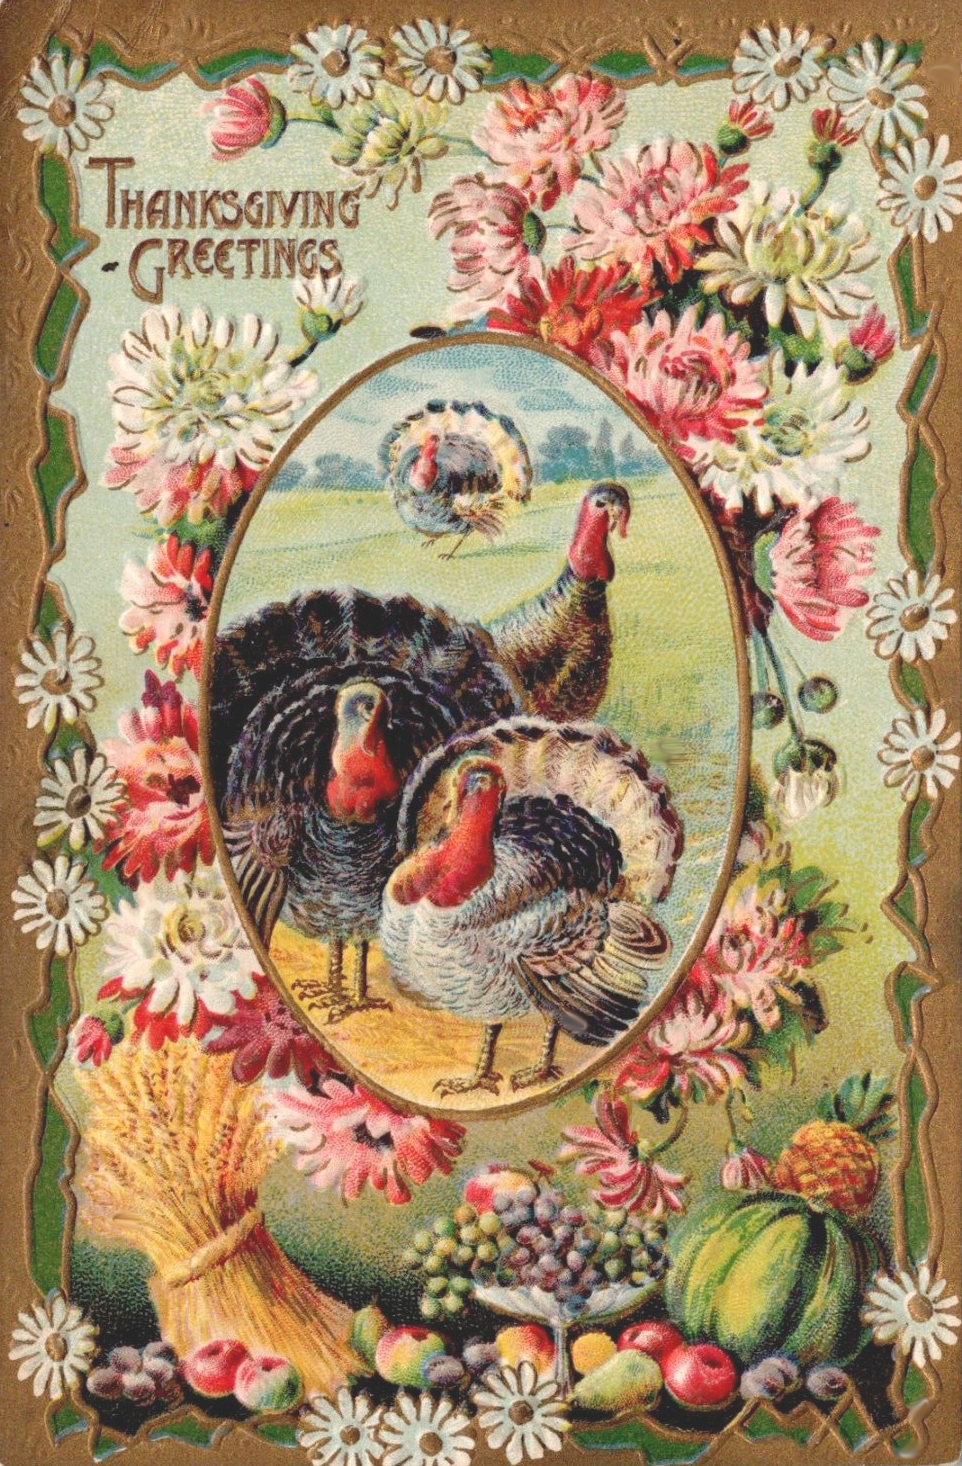 Vintage Thanksgiving Greetings postcard image with pink flowers and turkeys.